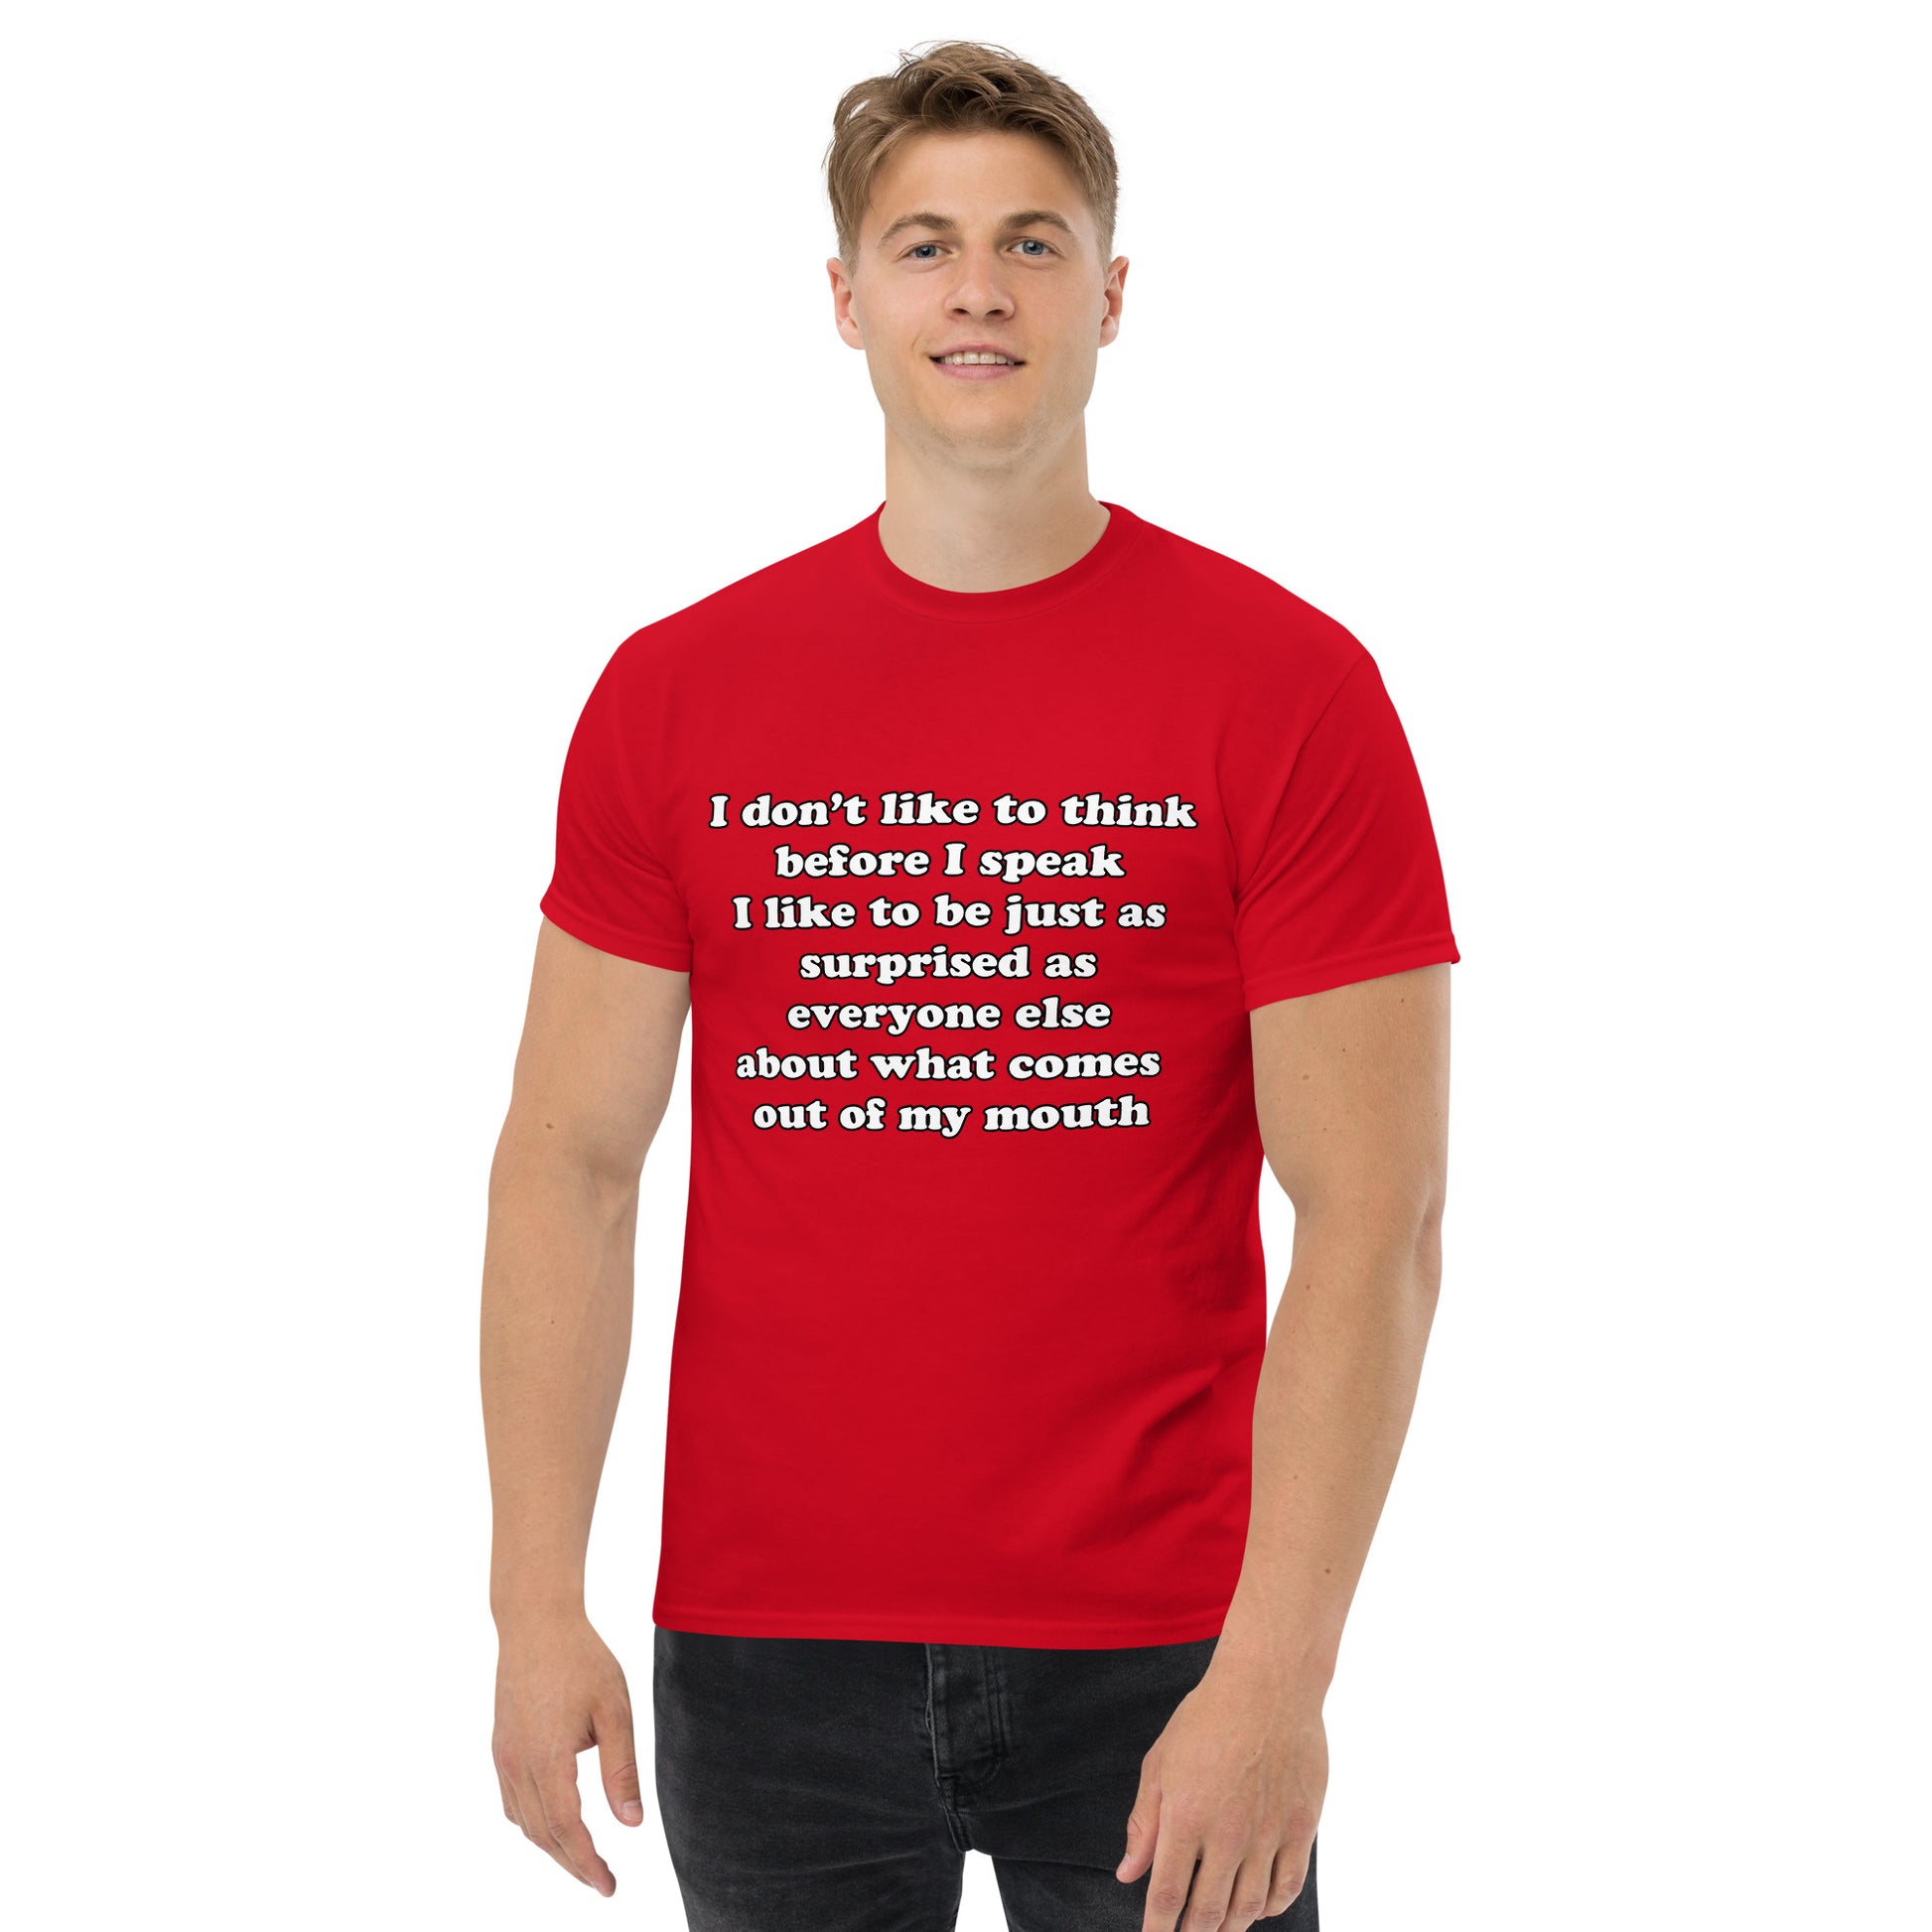 Man with red t-shirt with text “I don't think before I speak Just as serprised as everyone about what comes out of my mouth"